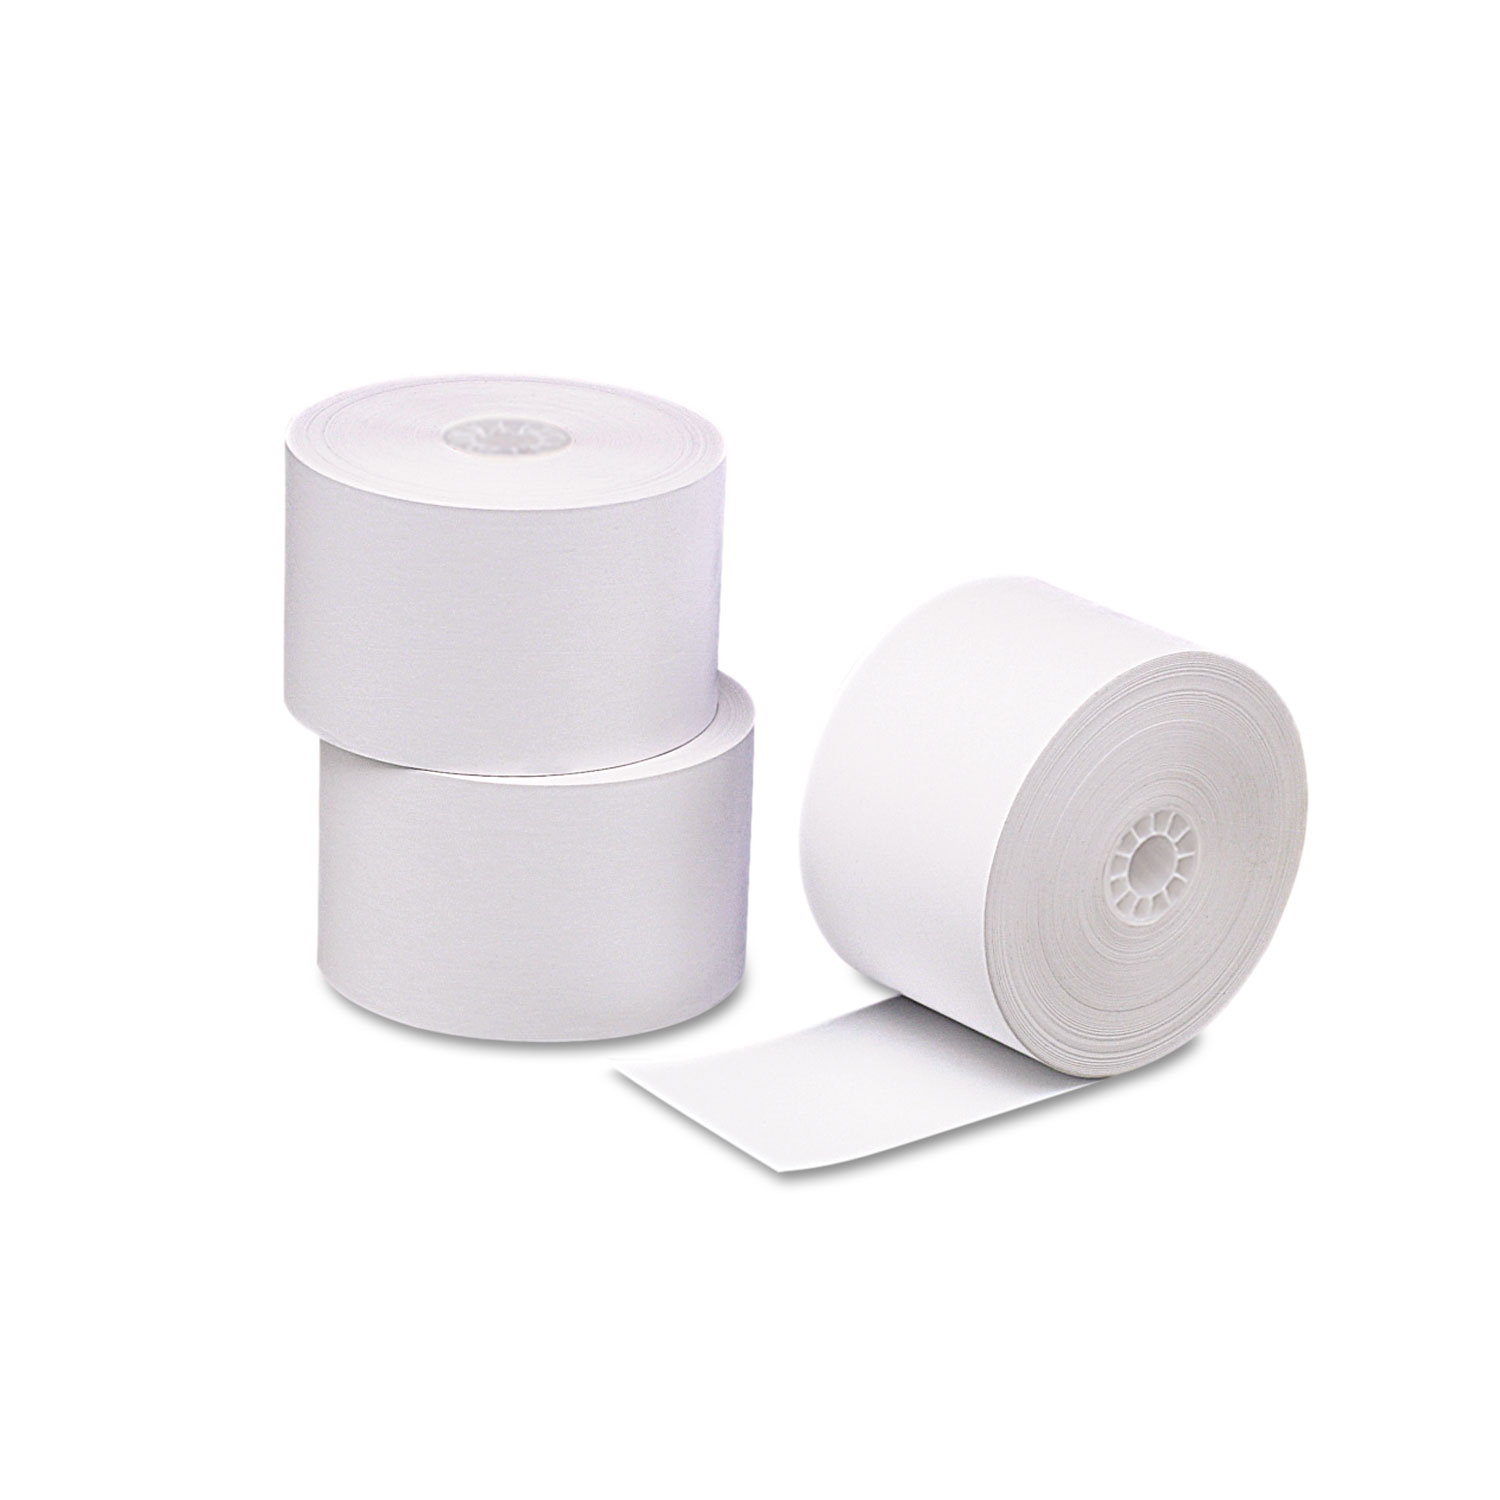  Iconex 9664 Direct Thermal Printing Paper Rolls, 0.69 Core, 2.31 x 356 ft, White, 24/Carton (ICX90780009) 